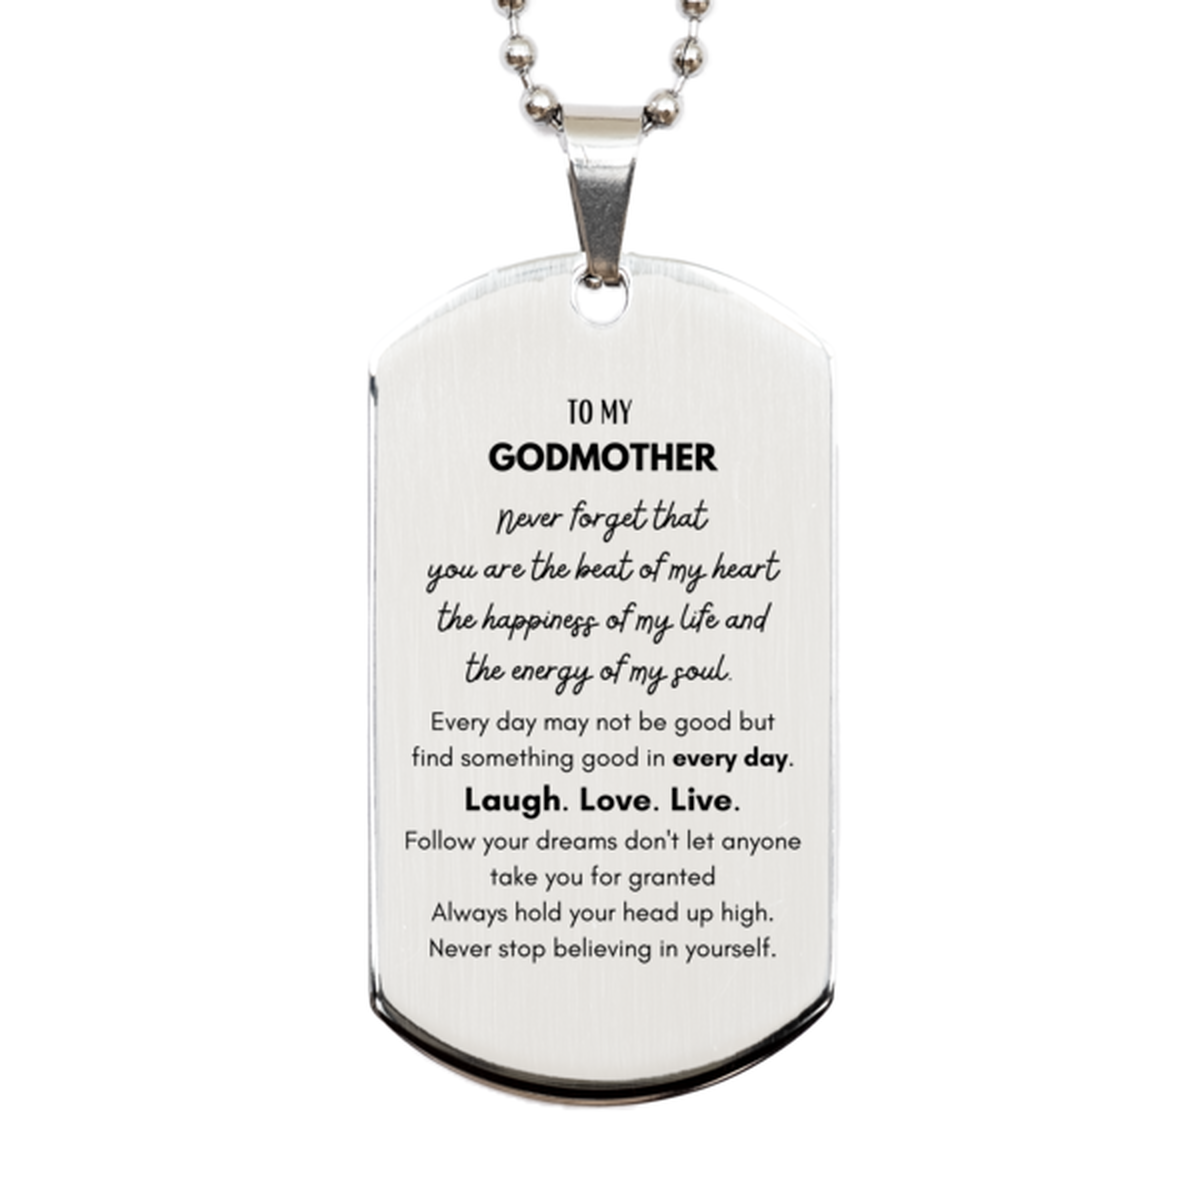 To My Godmother Dogtag Gifts, Christmas Godmother Silver Dog Tag Present, Birthday Unique Motivational For Godmother, To My Godmother Never forget that you are the beat of my heart the happiness of my life and the energy of my soul